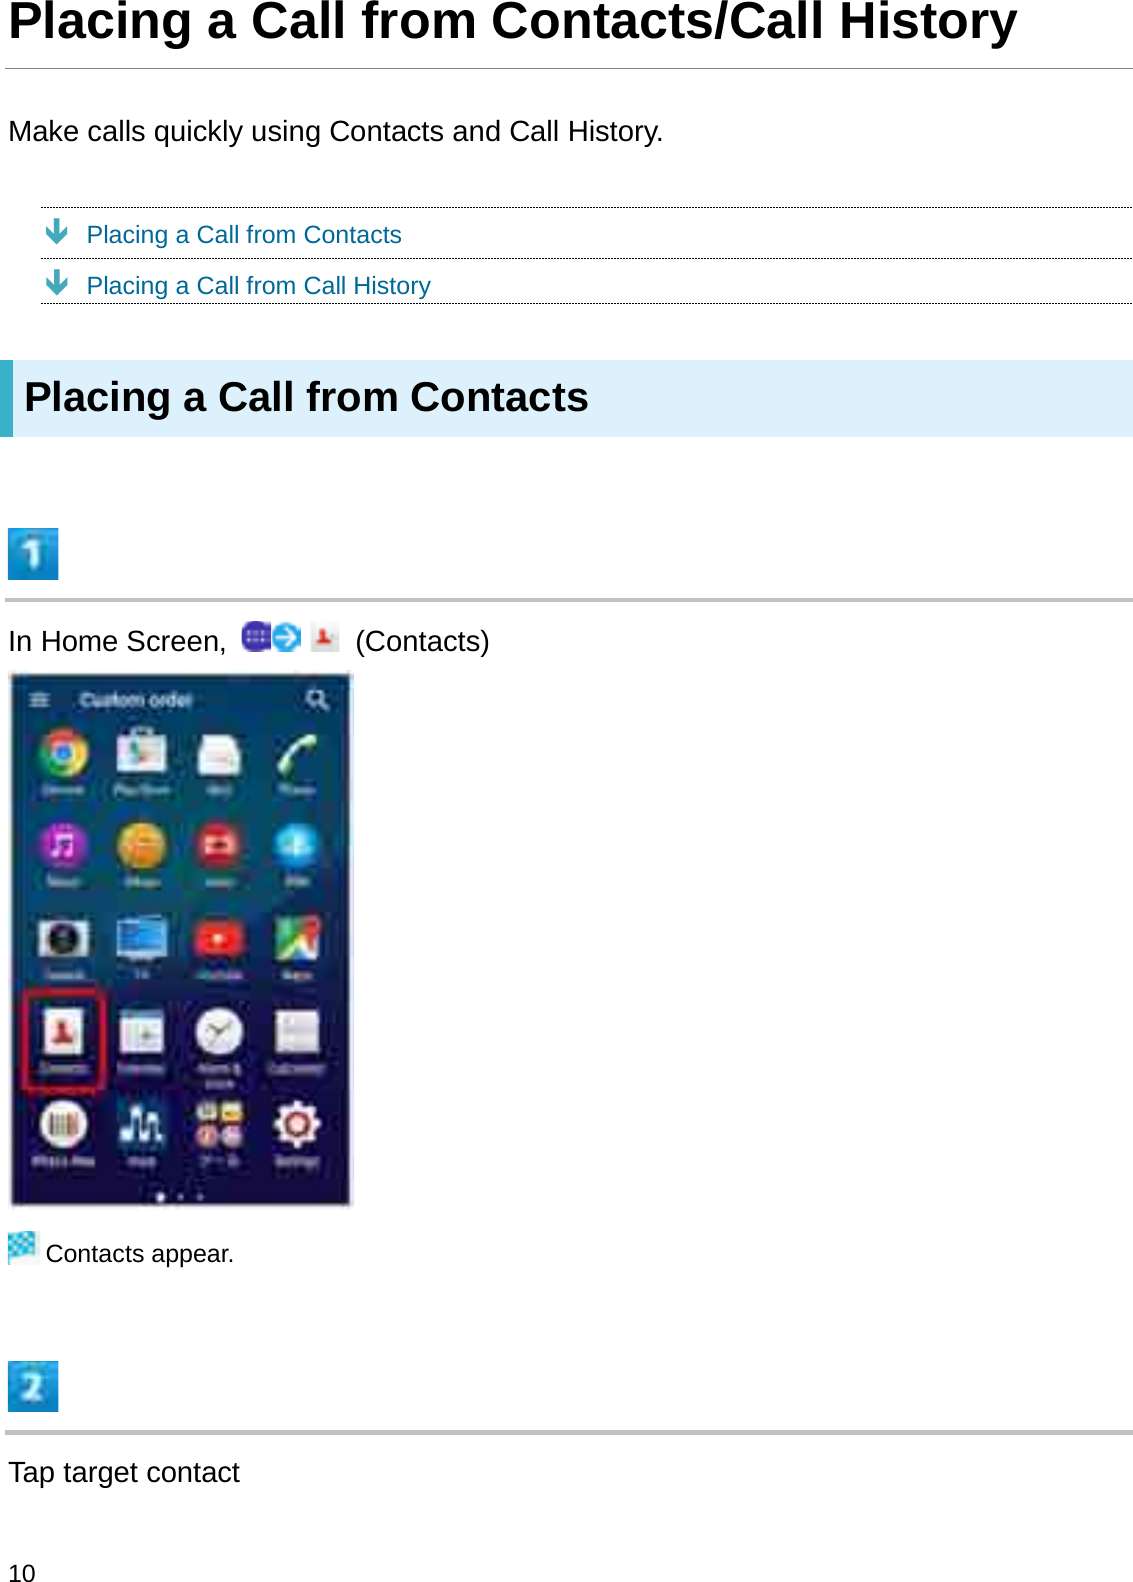 Placing a Call from Contacts/Call HistoryMake calls quickly using Contacts and Call History.ÐPlacing a Call from ContactsÐPlacing a Call from Call HistoryPlacing a Call from ContactsIn Home Screen,  (Contacts)Contacts appear.Tap target contact10